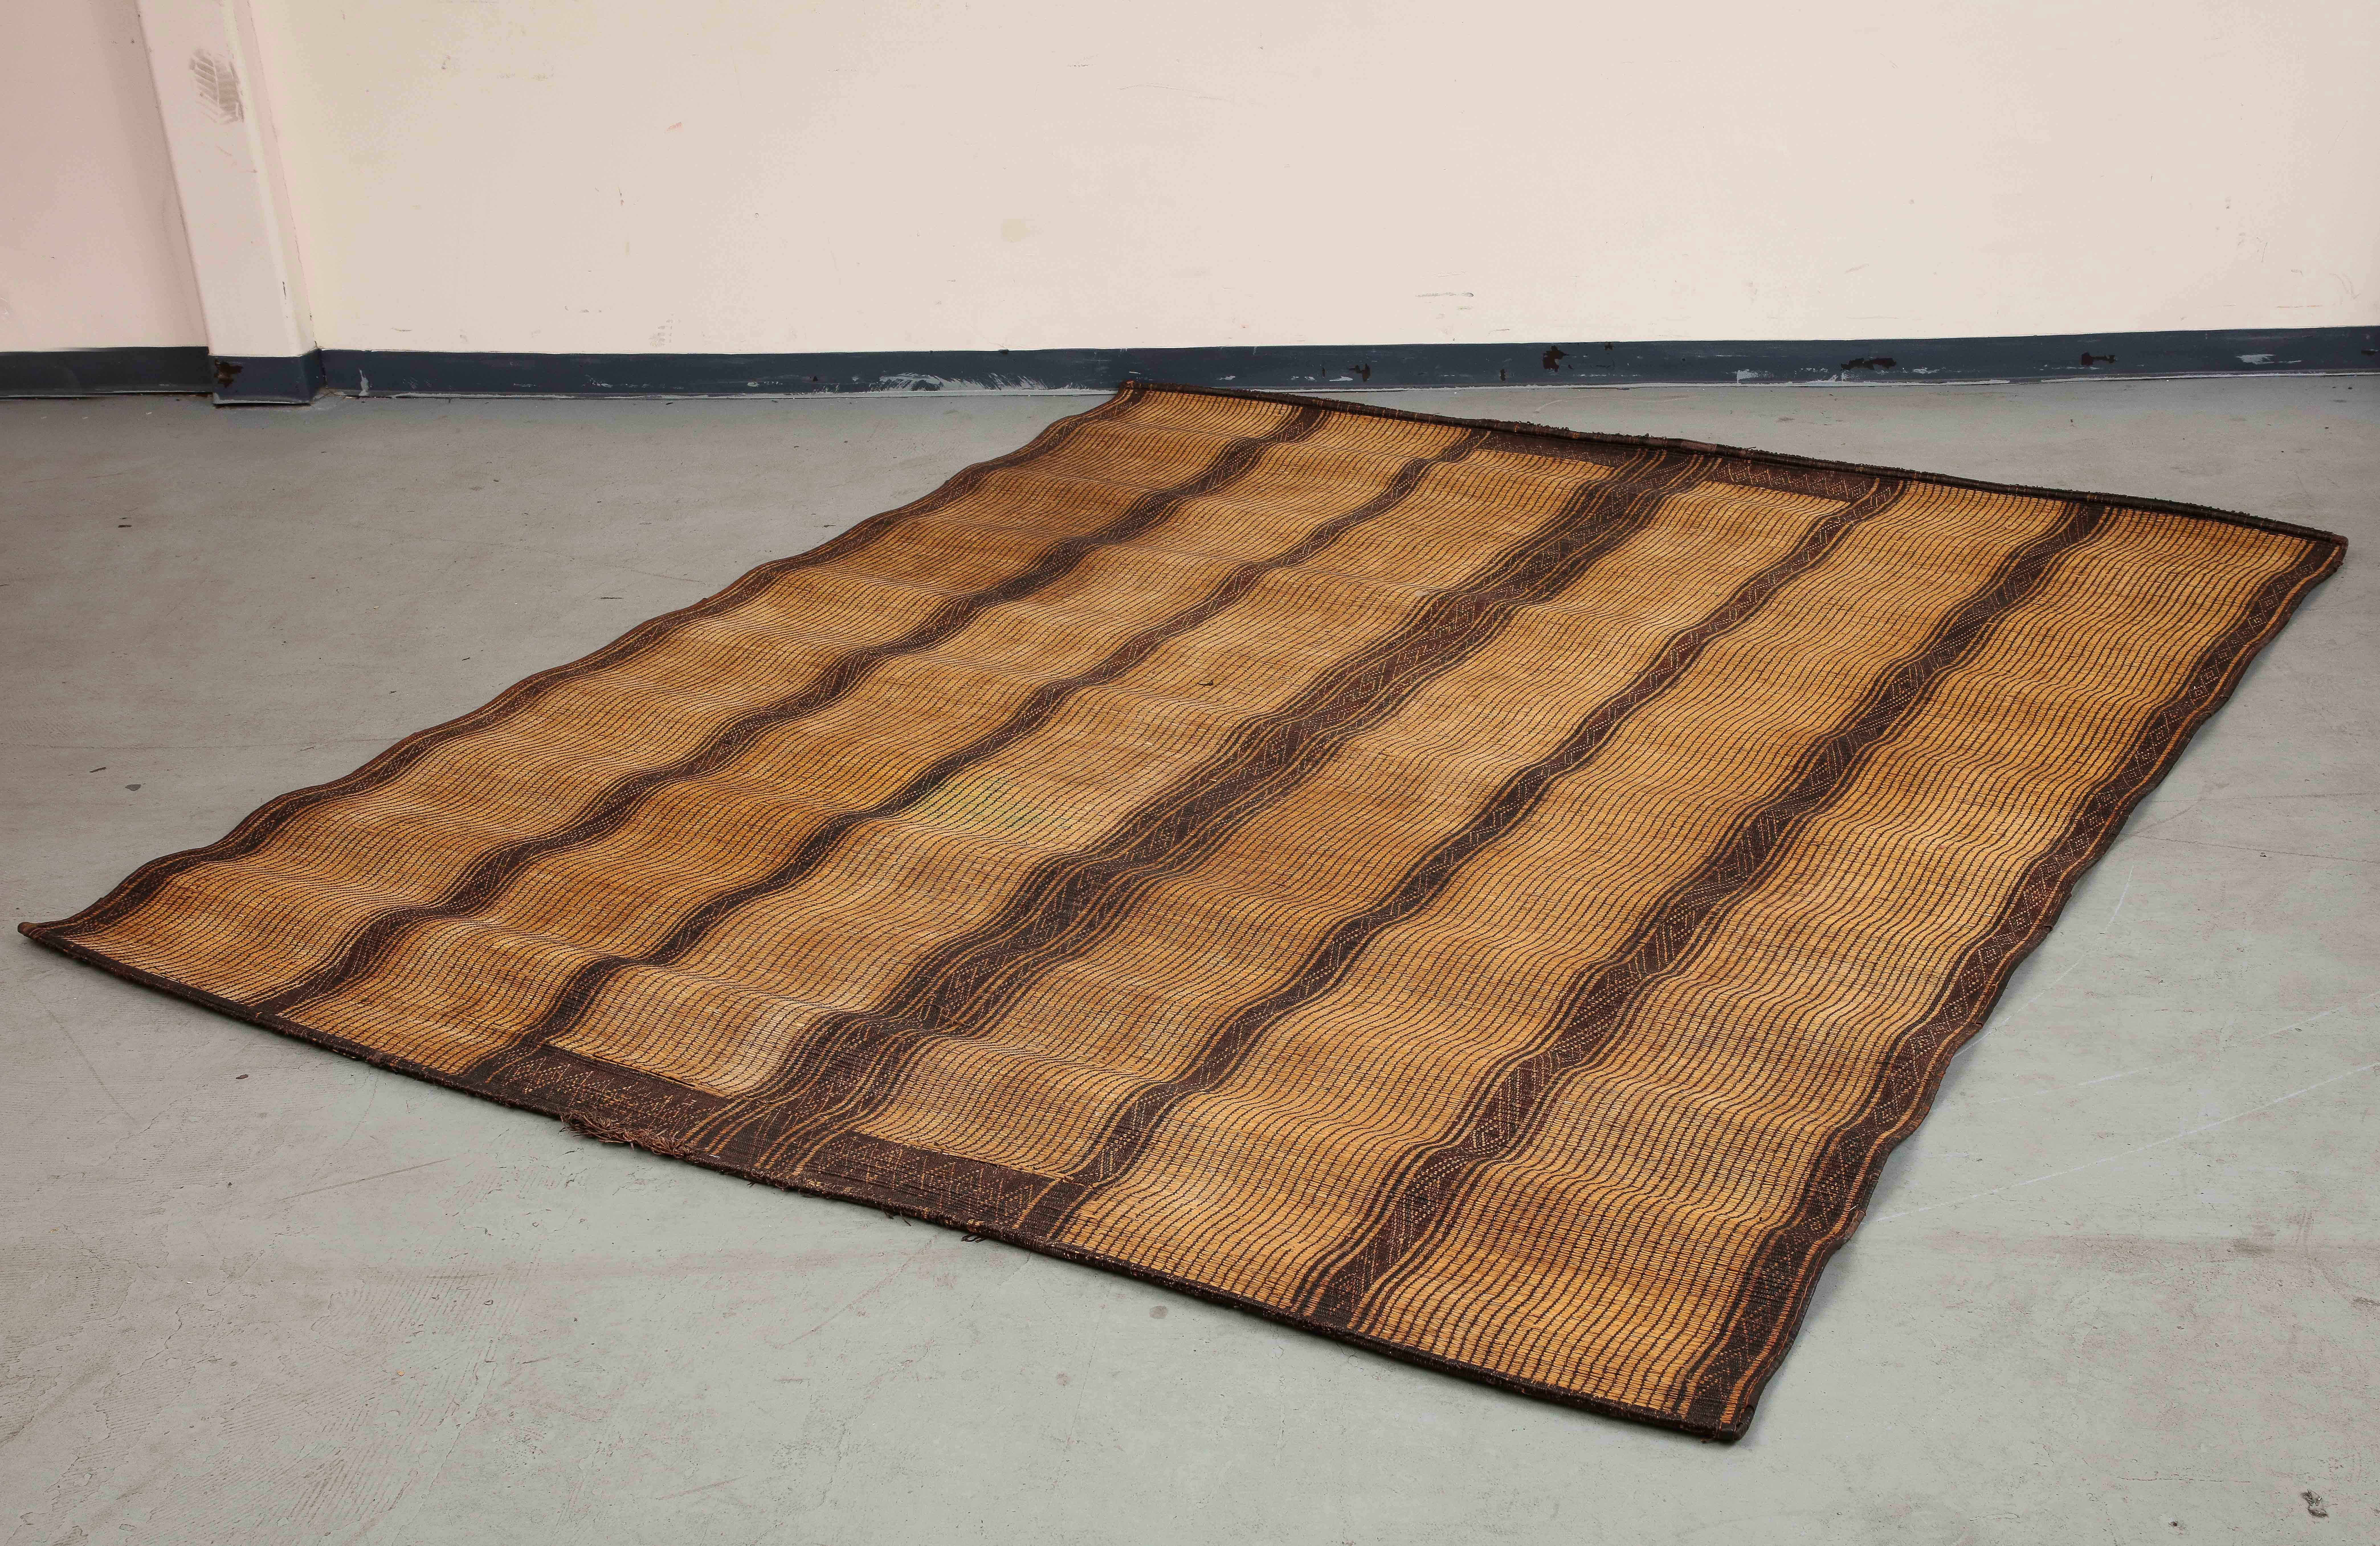 Vintage 20th century Moroccan Tuareg mat rug, made of handwoven reeds. Featuring six wide lighter natural/tan 